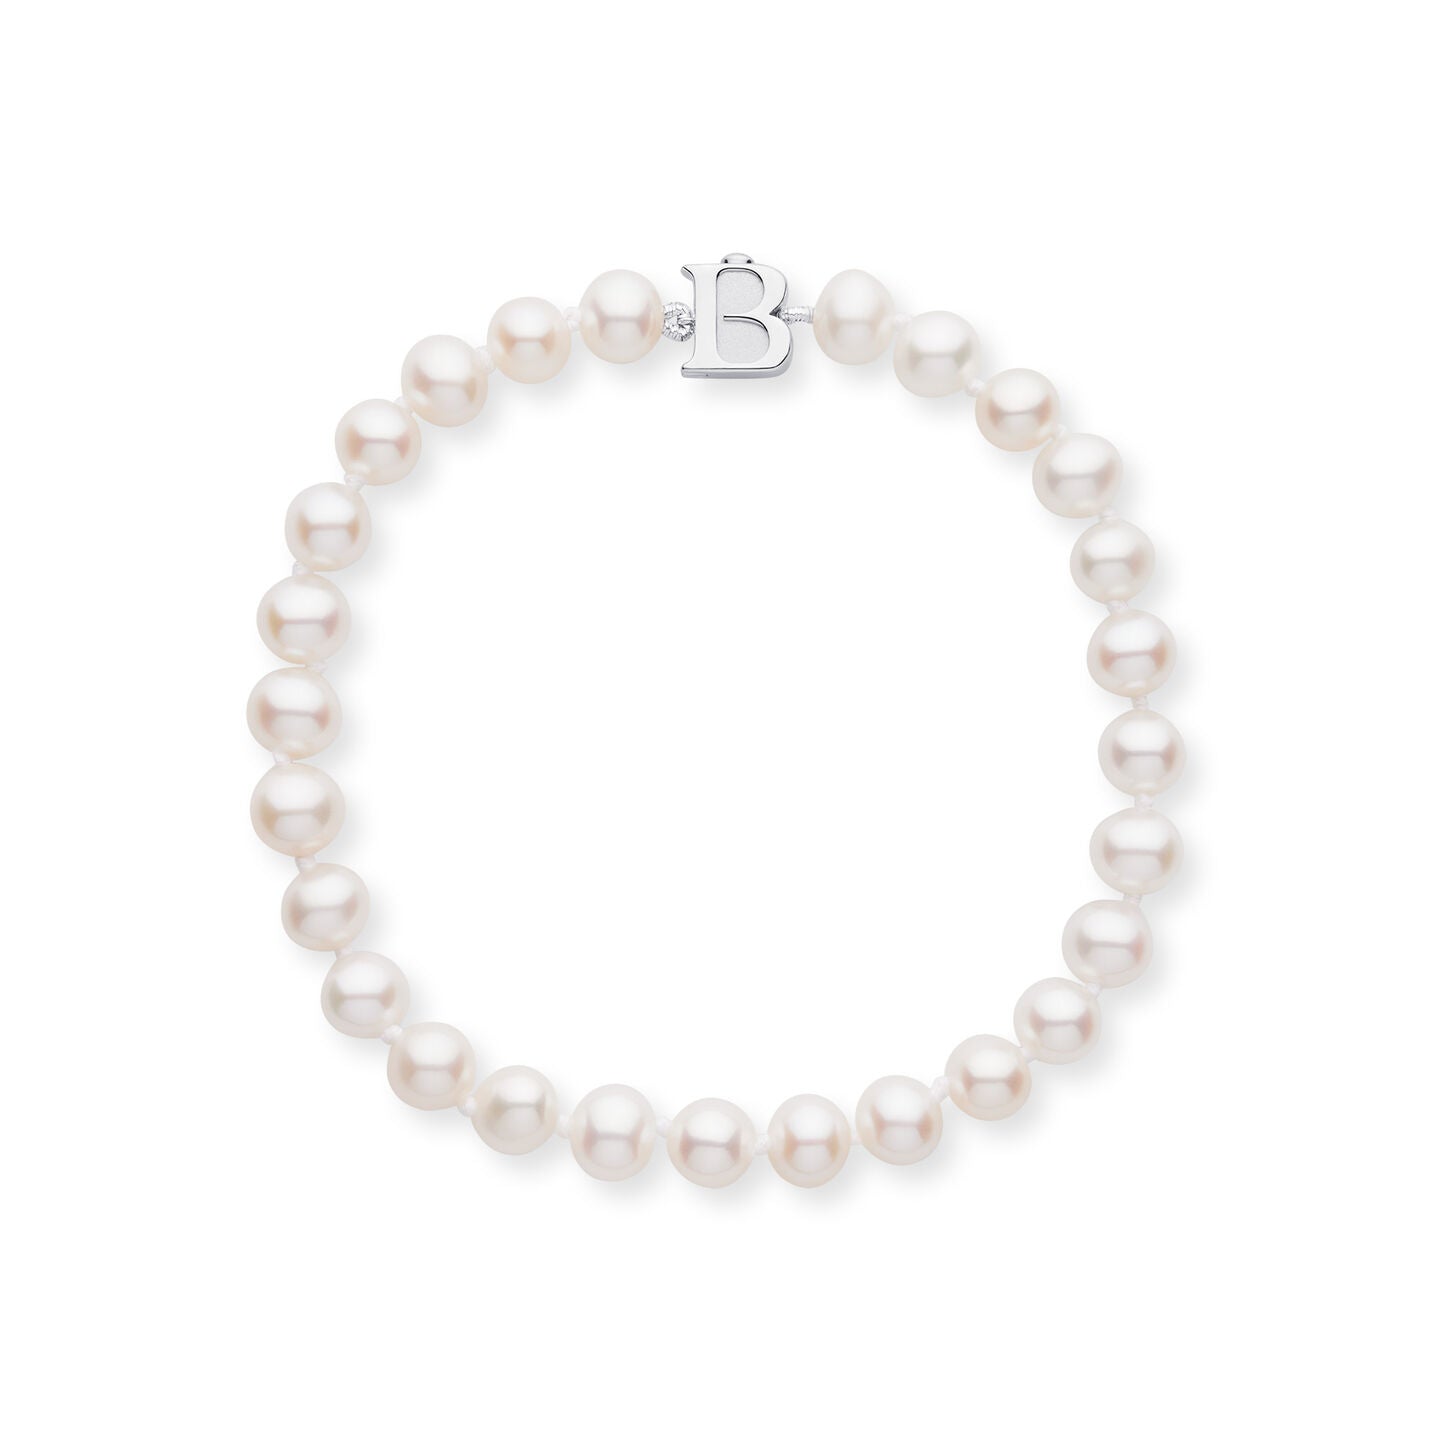 Birks Freshwater Pearl Bracelet with Silver Clasp